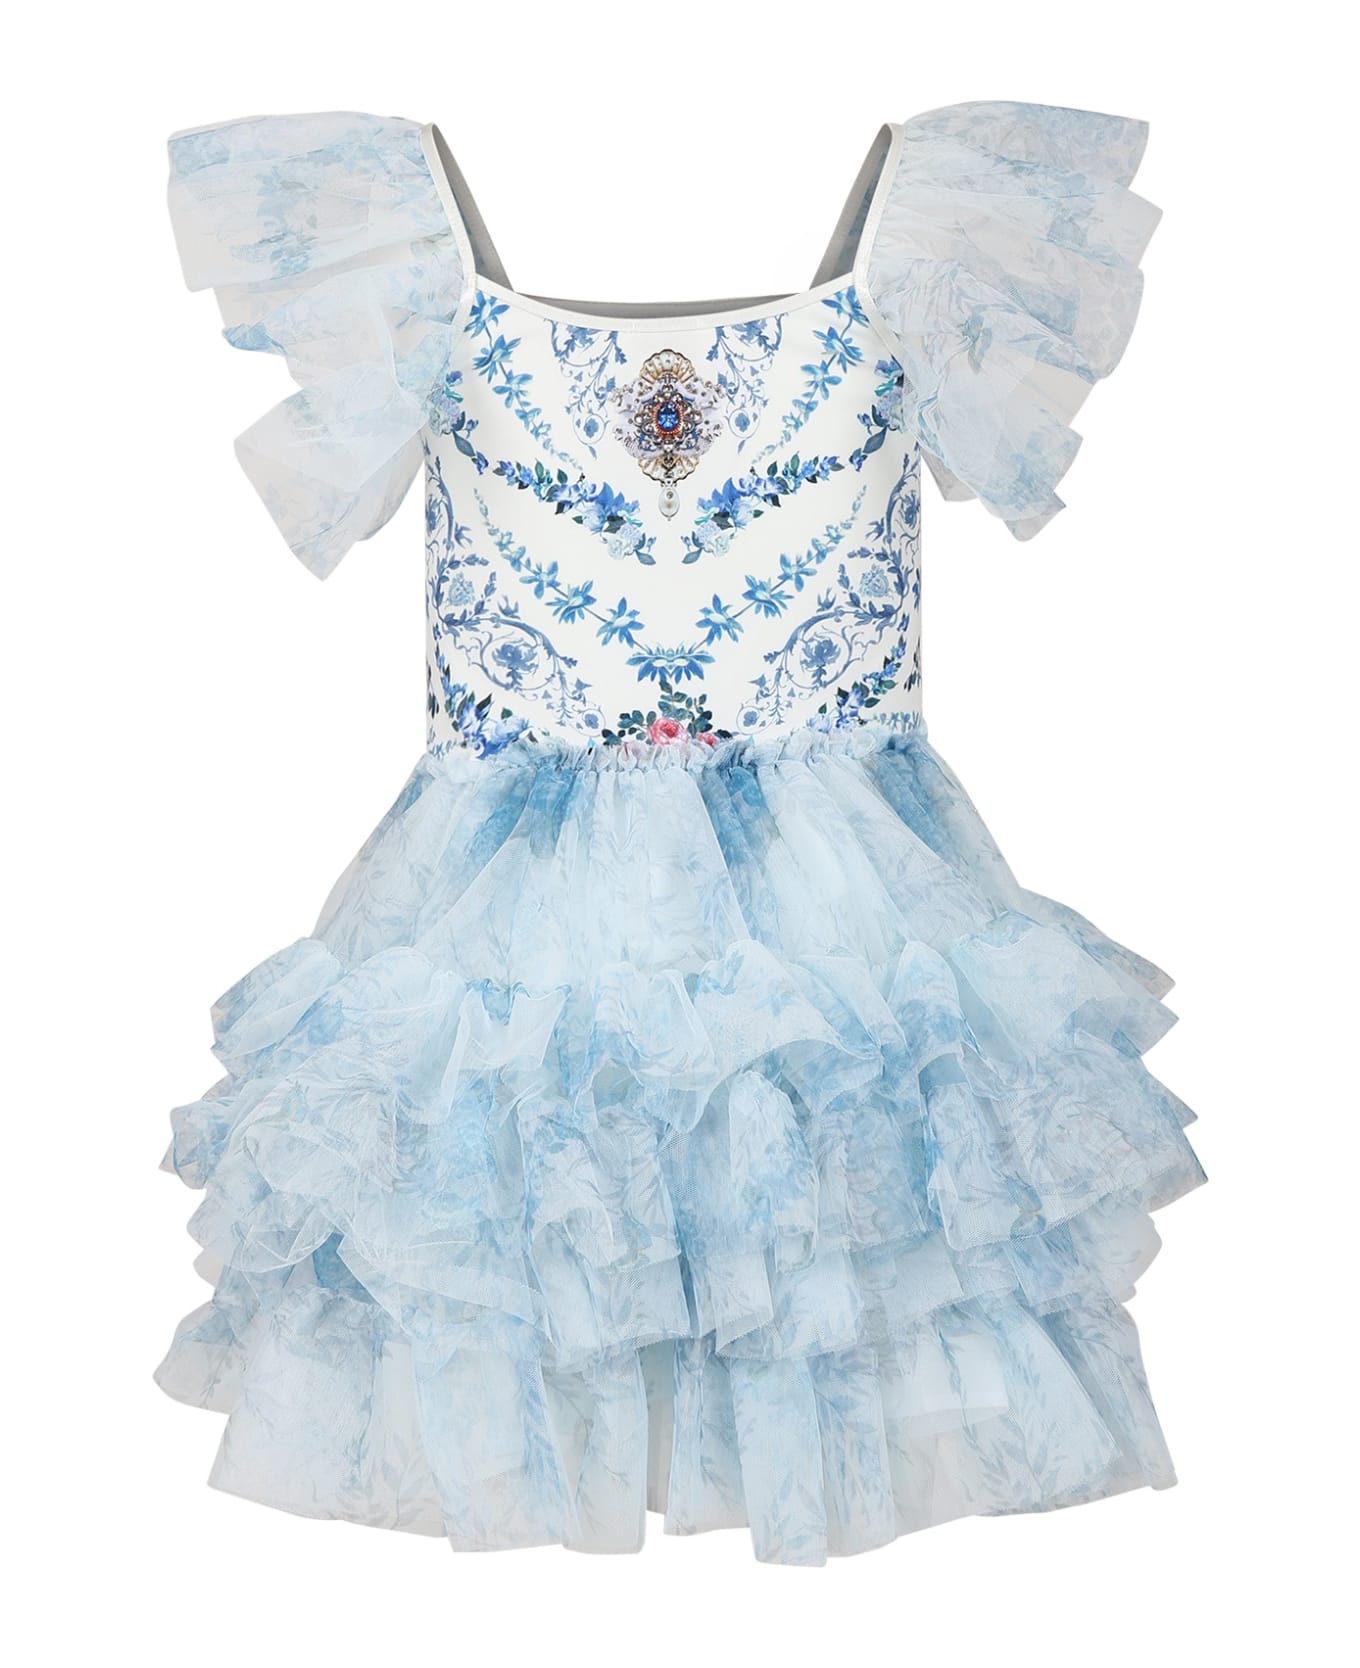 Camilla Light Blue Dress For Girl With Floral Print - Light Blue